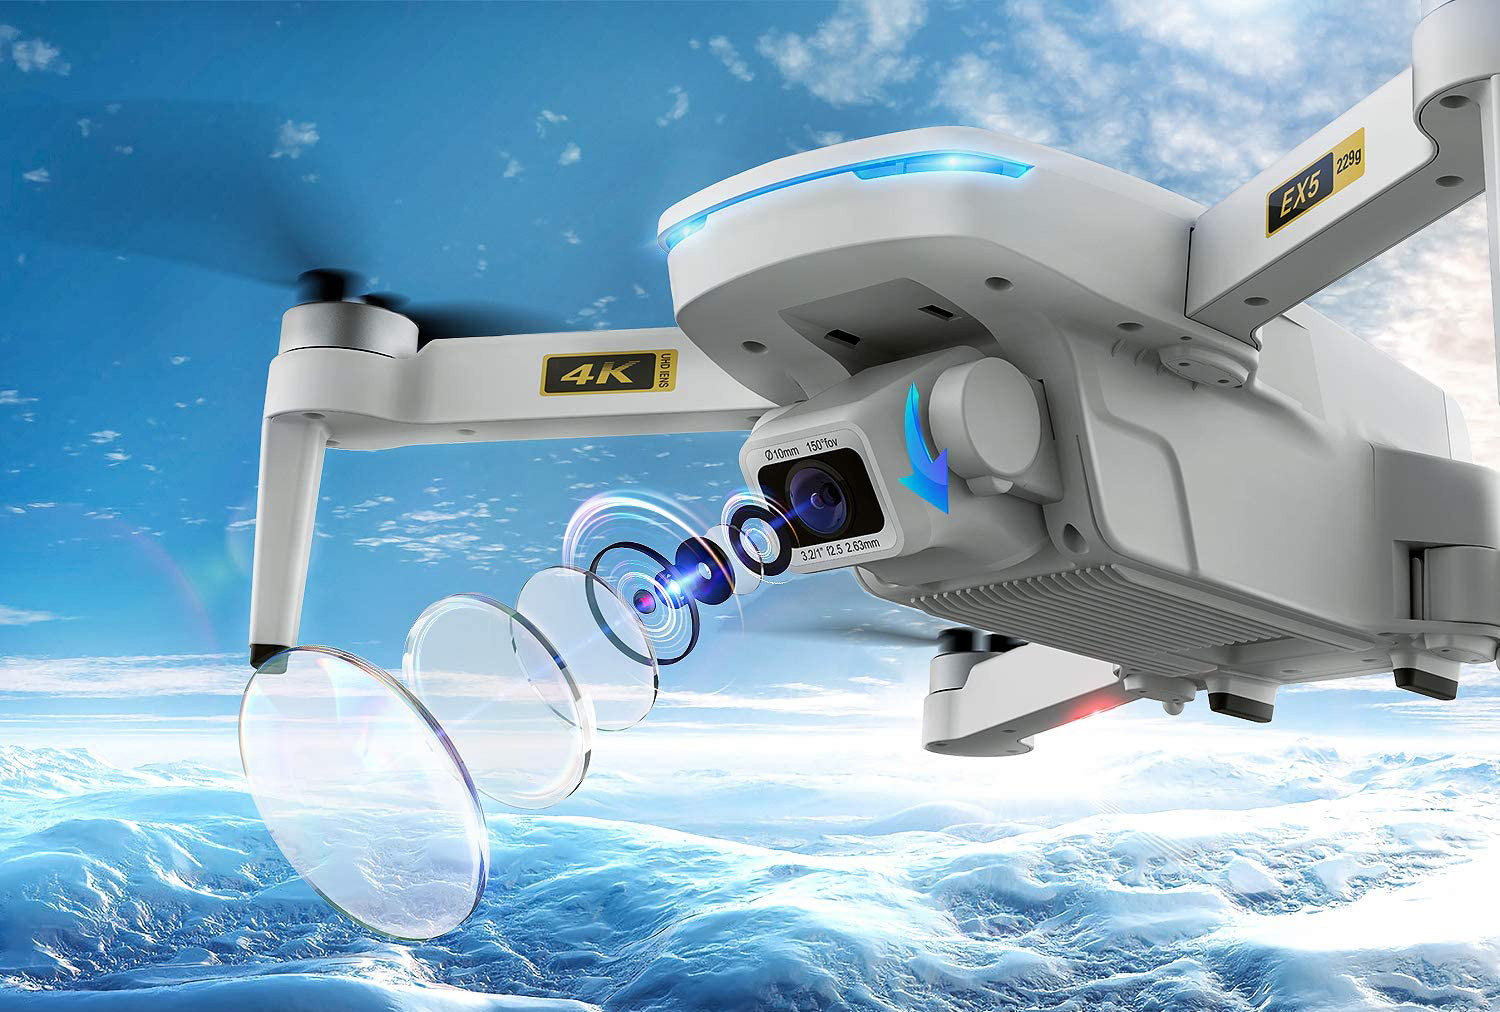 Amazon’s $100 coupon slashes this best-selling 4K camera drone to just